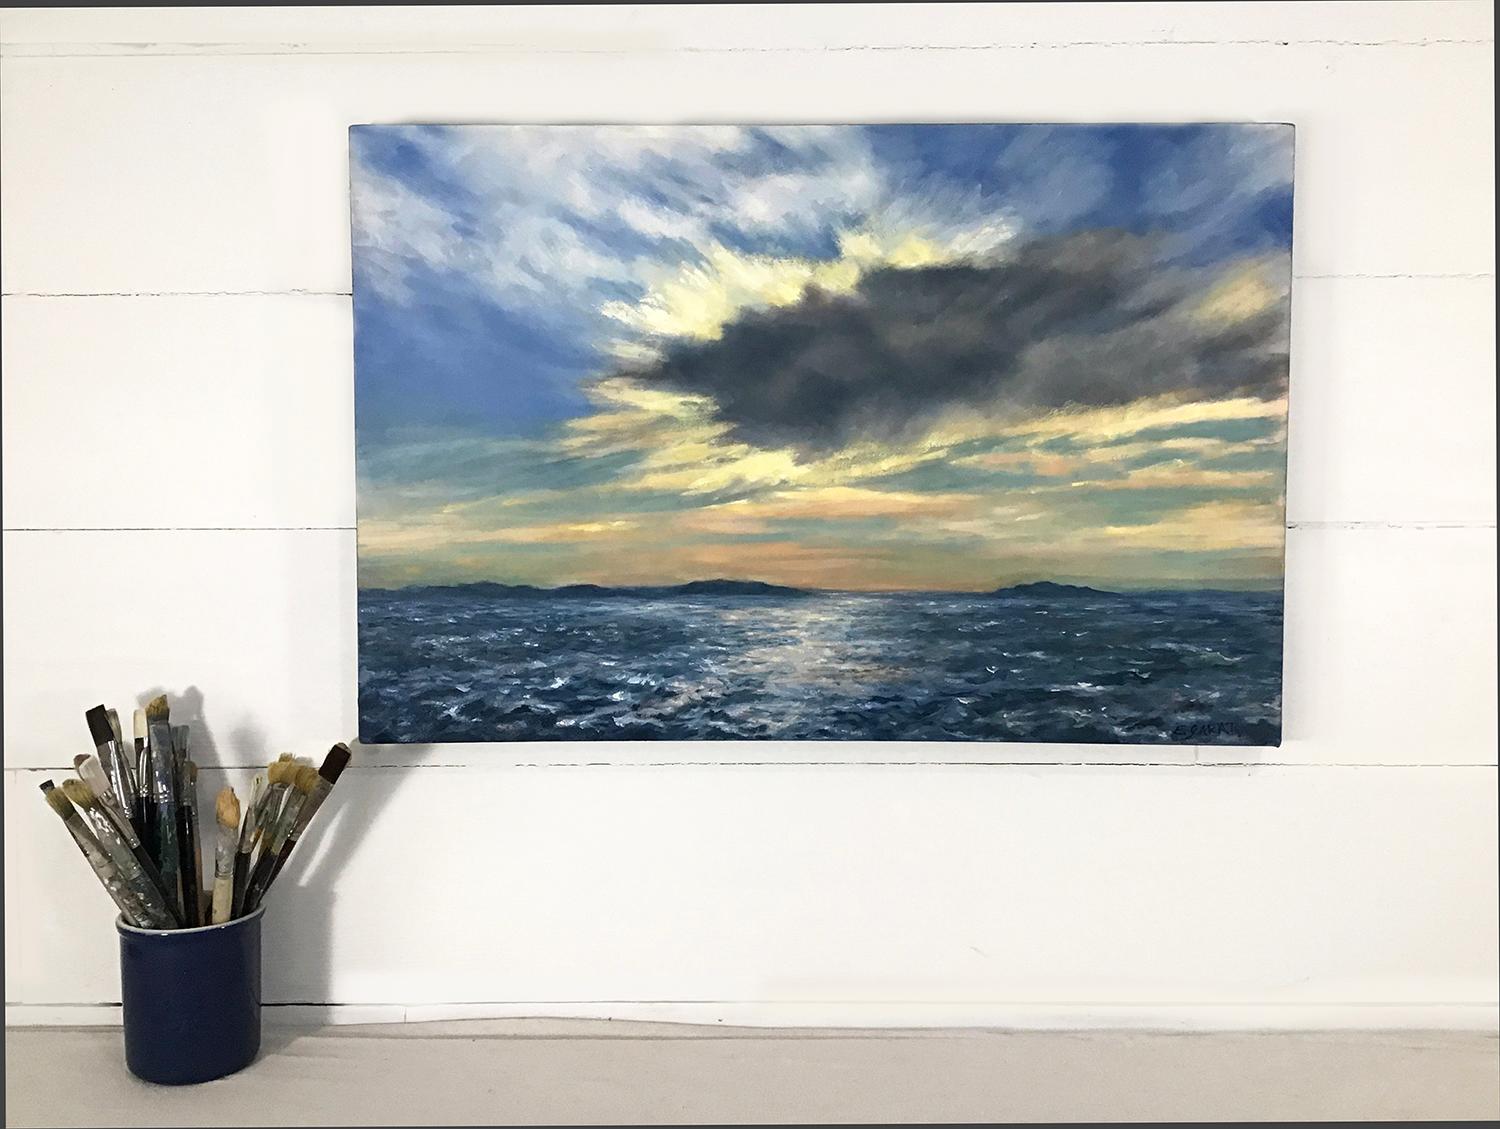 <p>Artist Comments<br>Artist Elizabeth Garat paints a dramatic view of the sky above the vast ocean's choppy waters and distant coastal islands. The brilliant rays of the sun illuminate the atmosphere and create a vibrant glow surrounding the edges